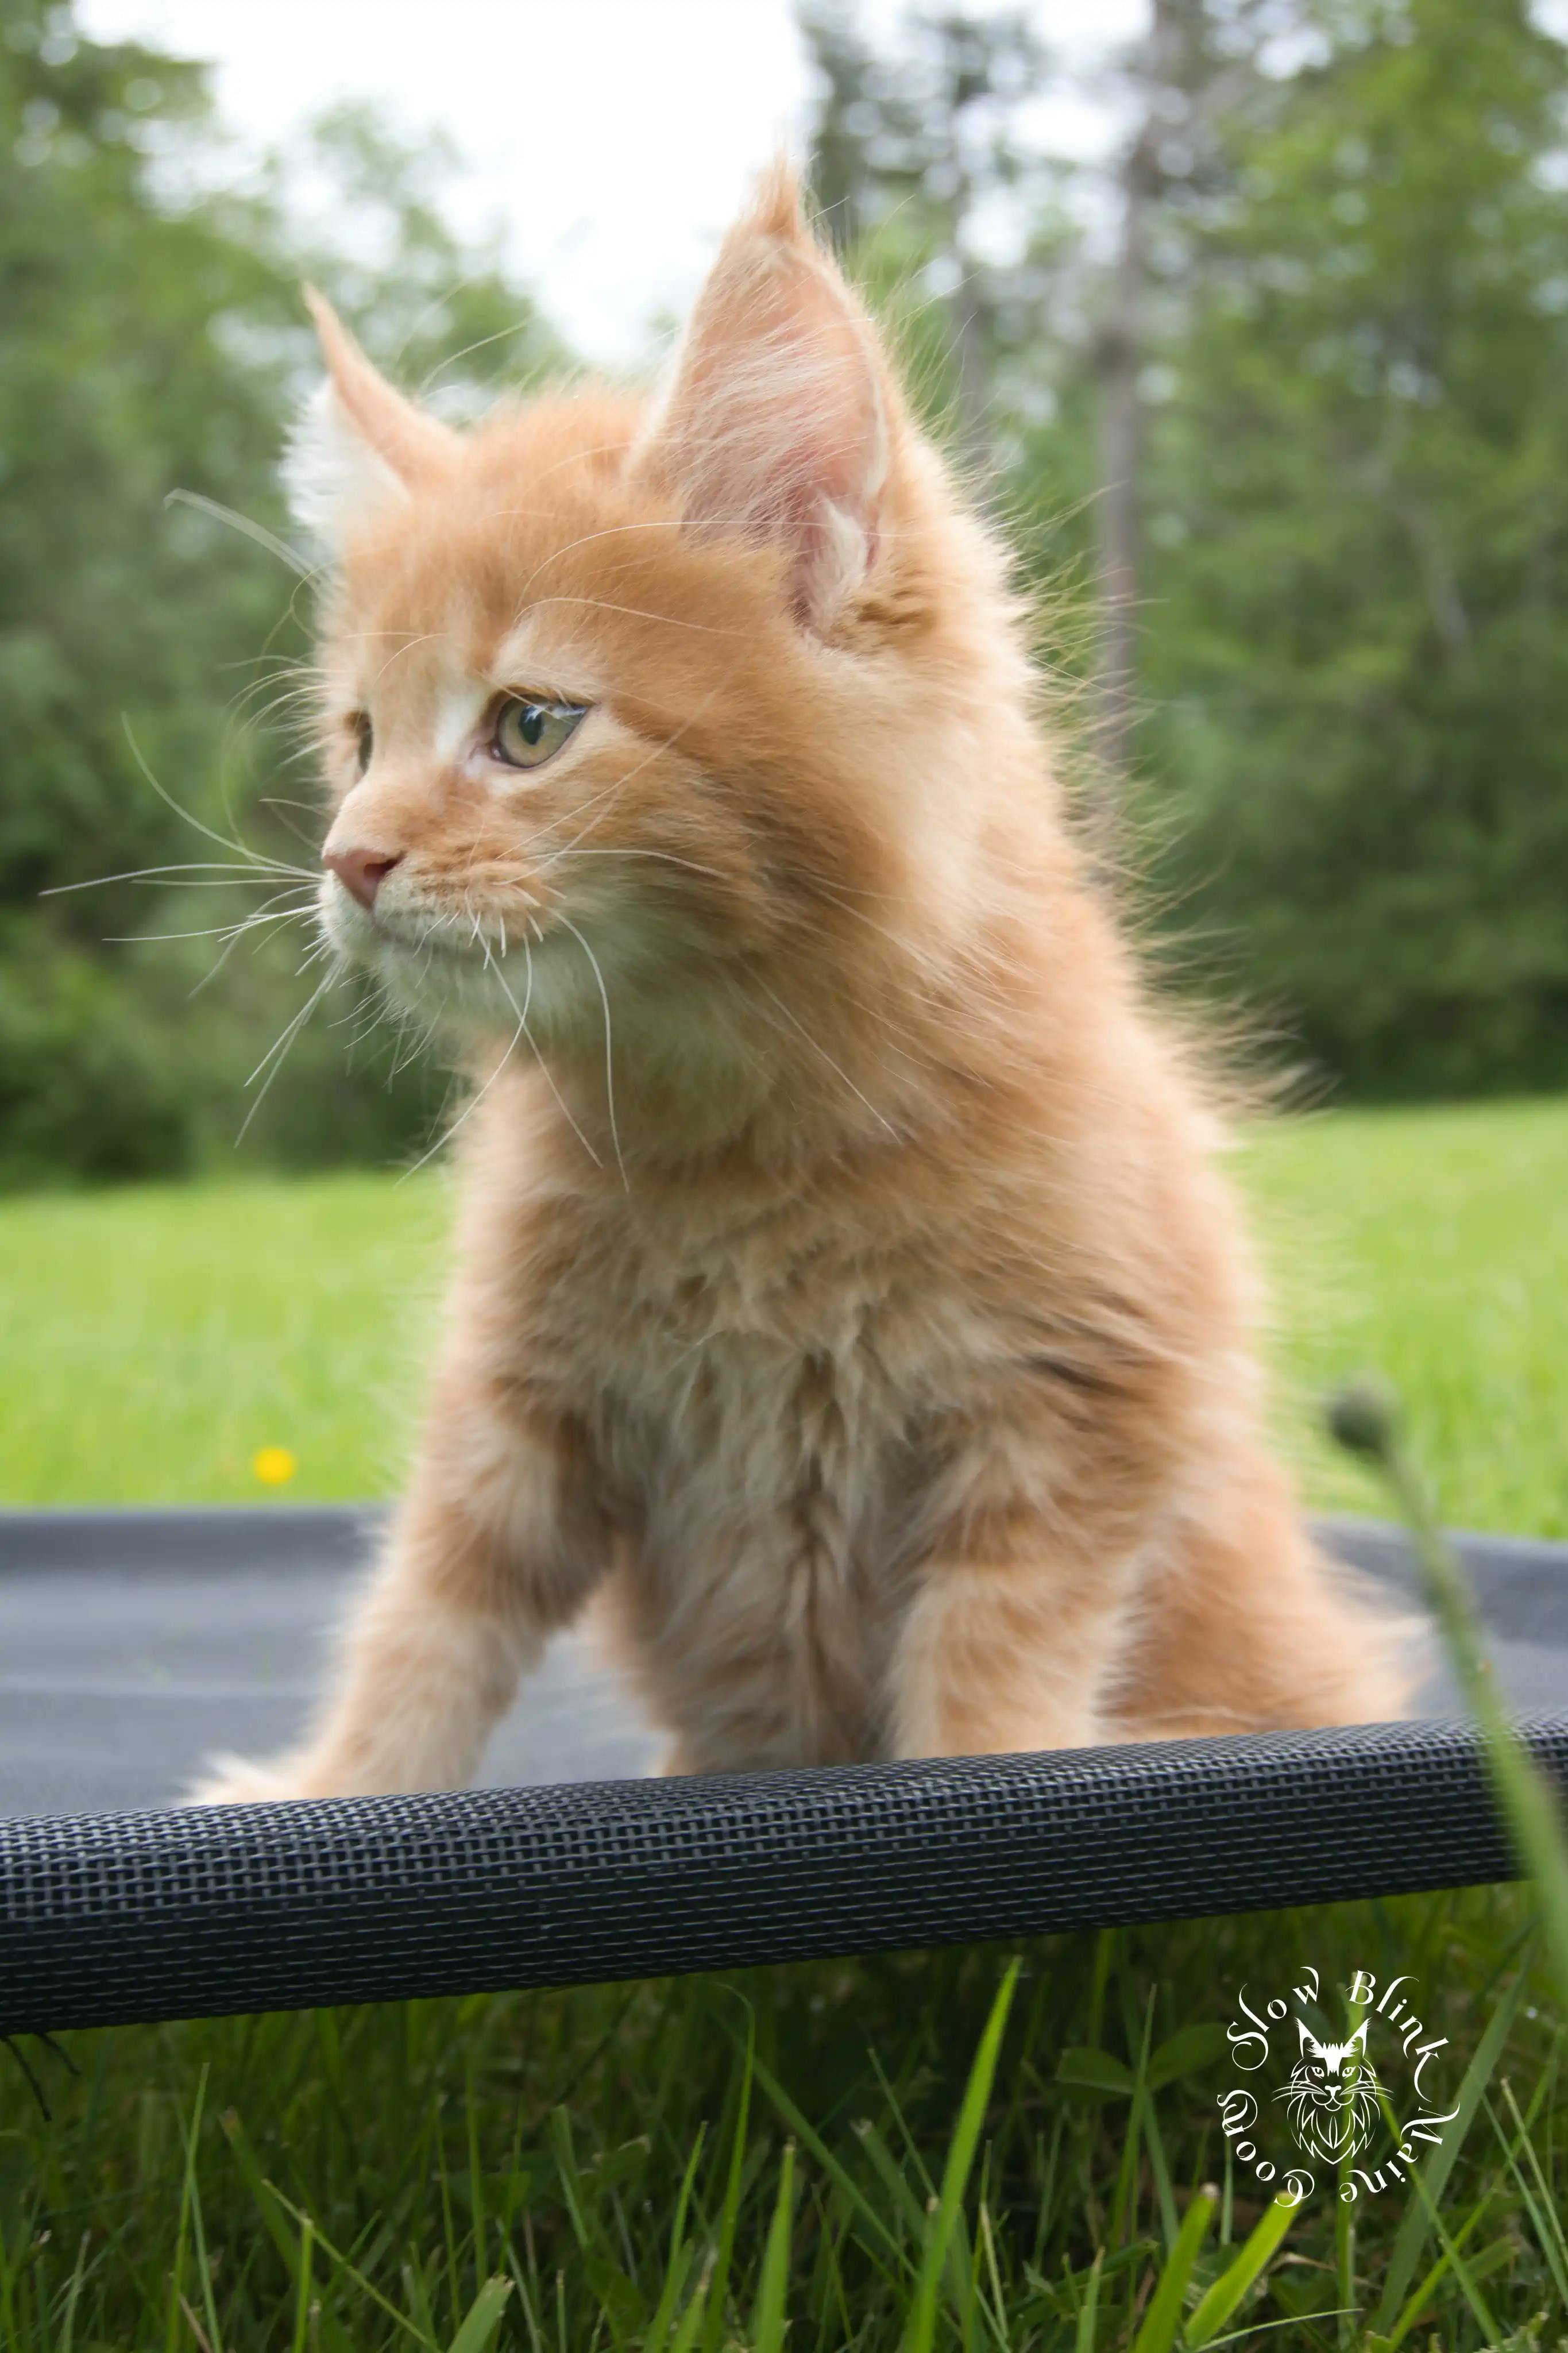 Orange (Red) Maine Coon Kittens > red orange maine coon kitten | slowblinkmainecoons | ems code d ds ds 22 1 19